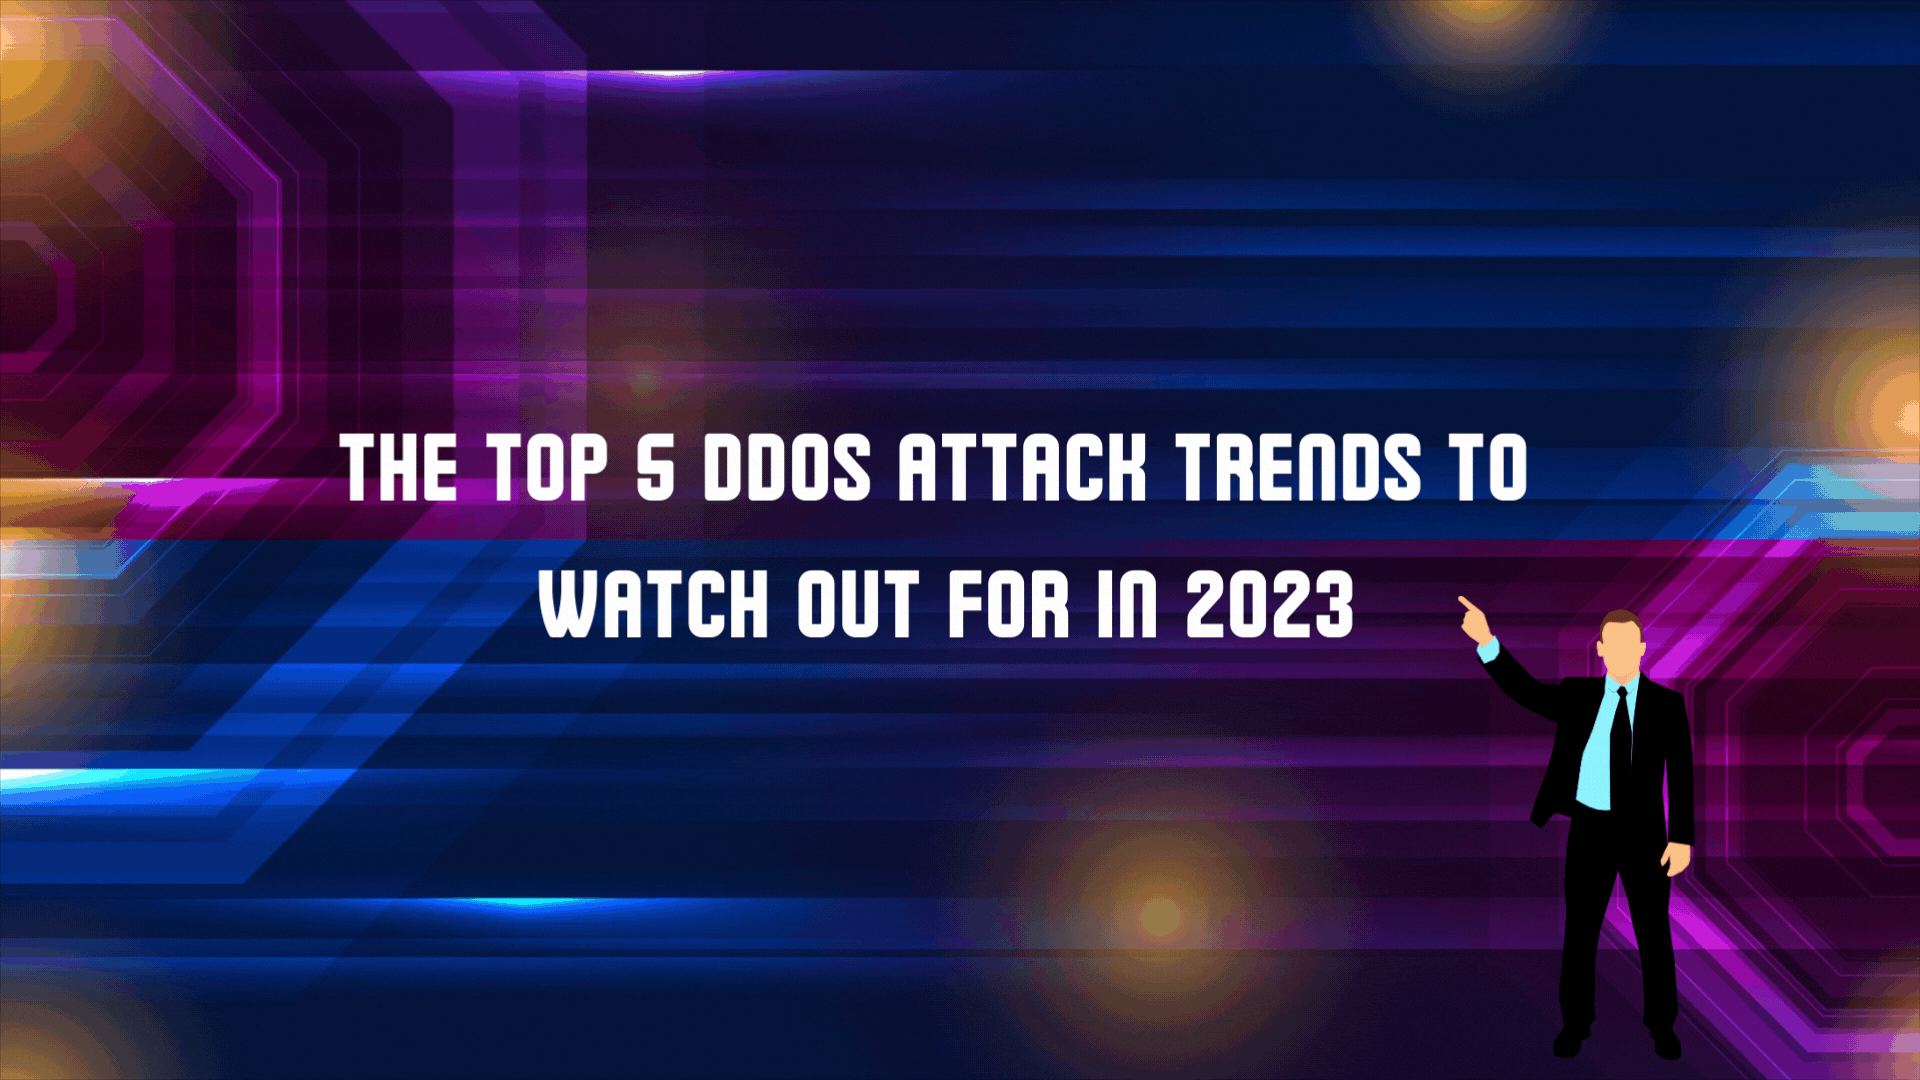 The Top 5 DDoS Attack Trends to Watch Out for in 2023